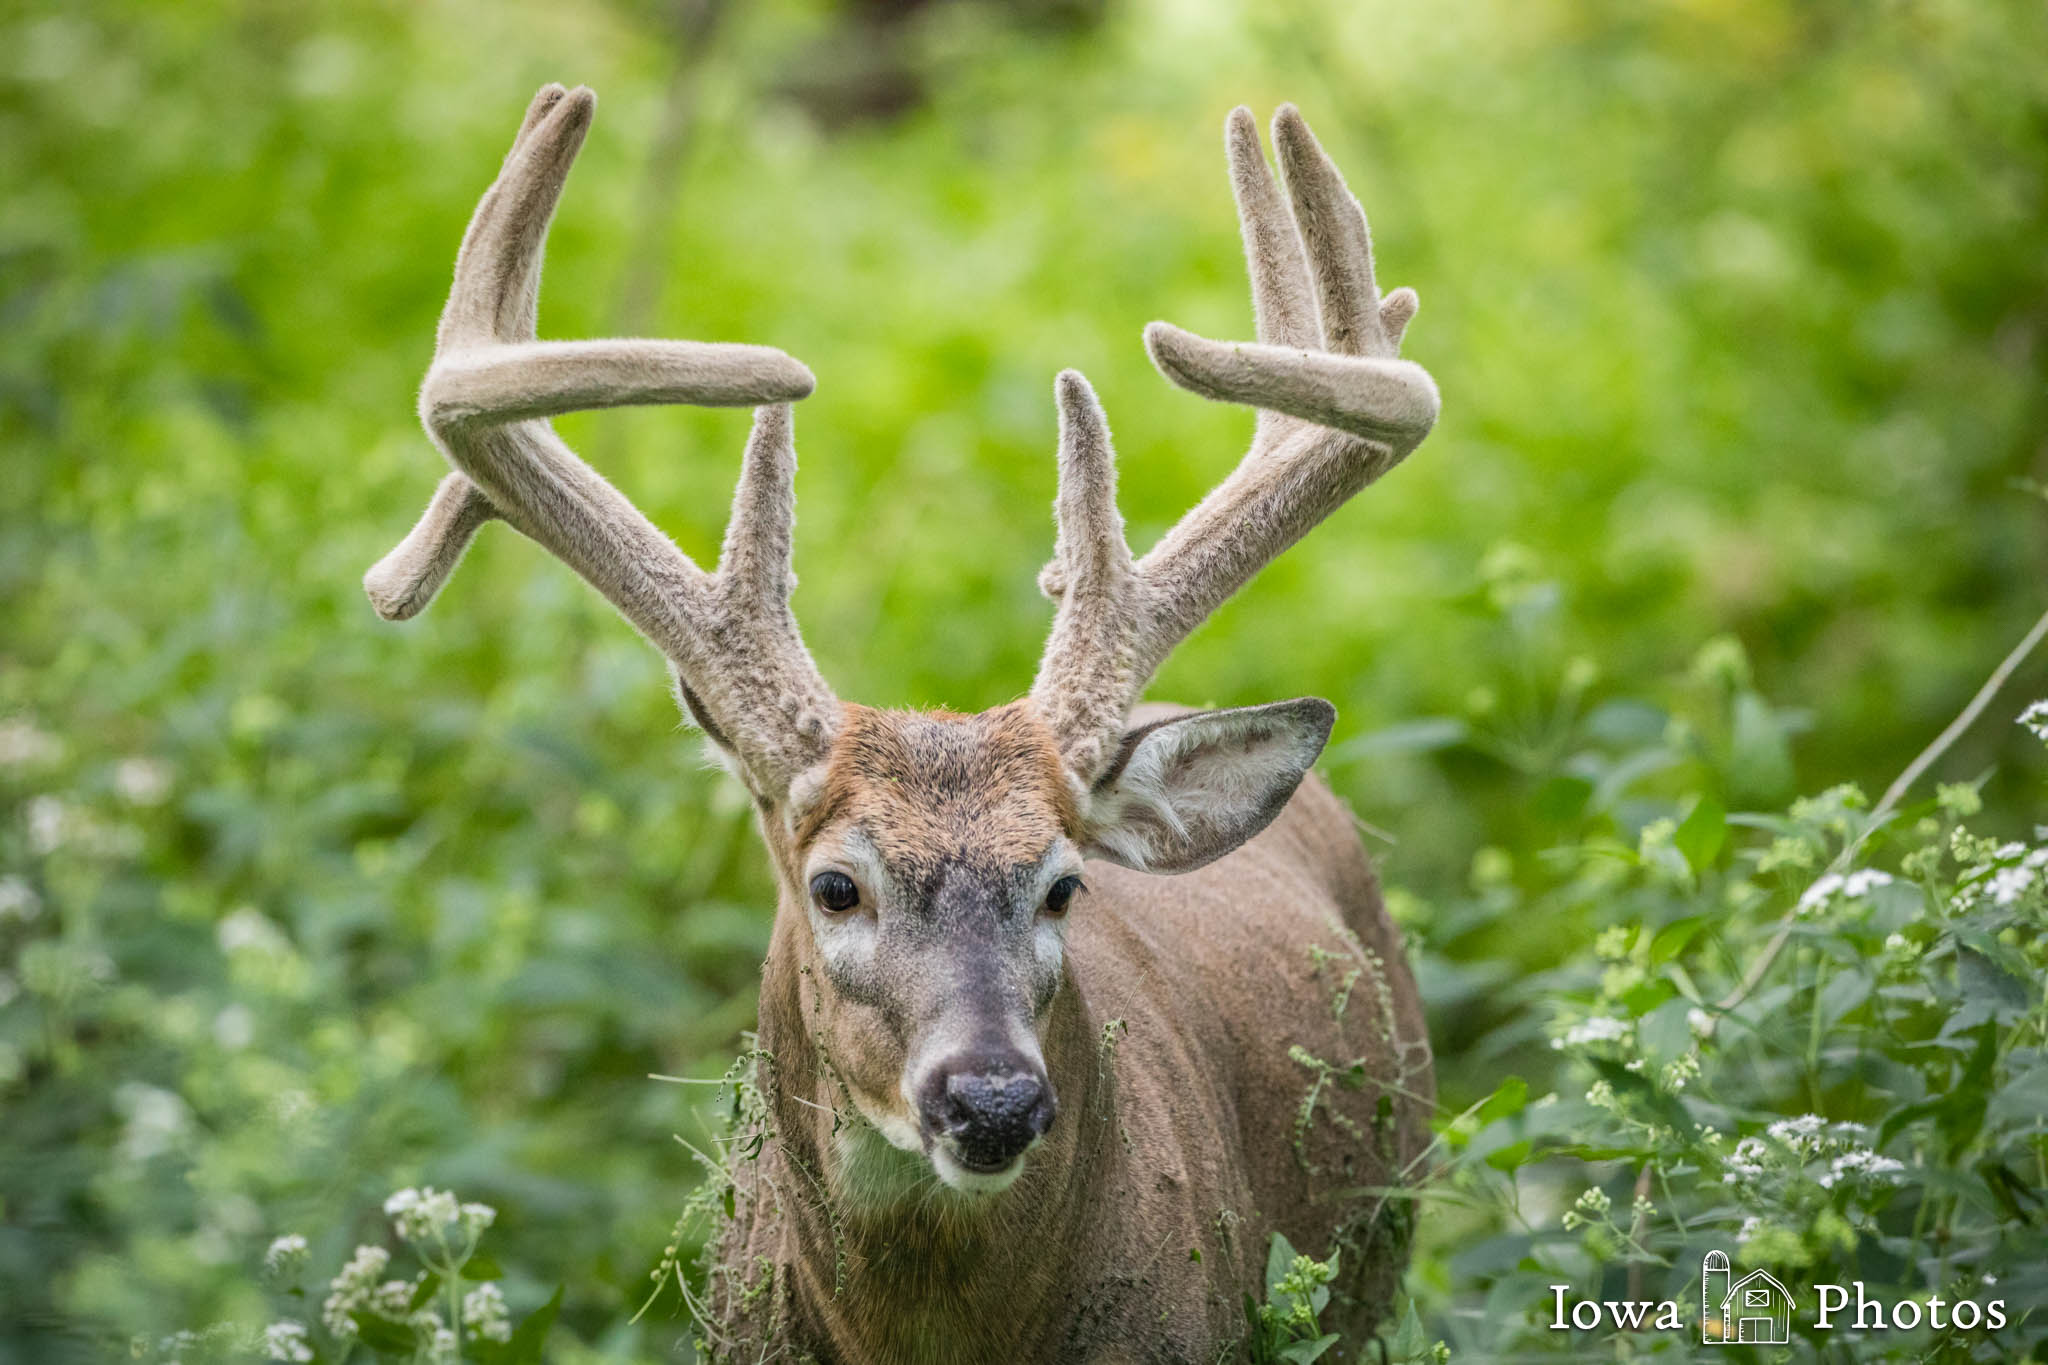 Picture of a Big Whitetail Buck in Velvet